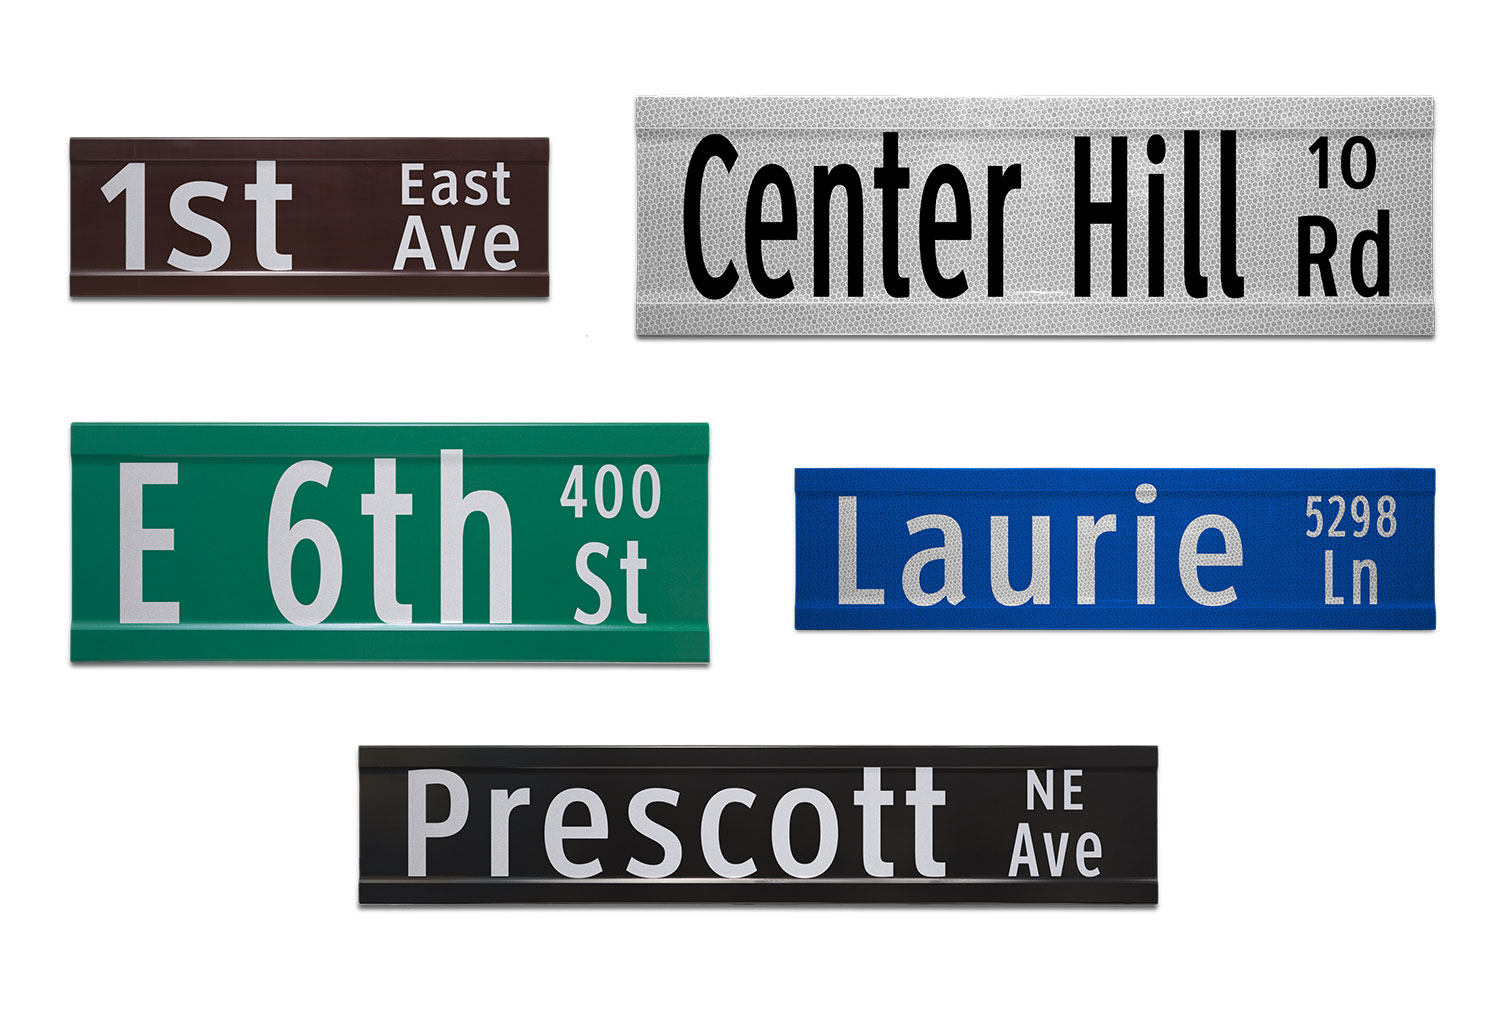 Samples of Printed Extruded Blade Signs